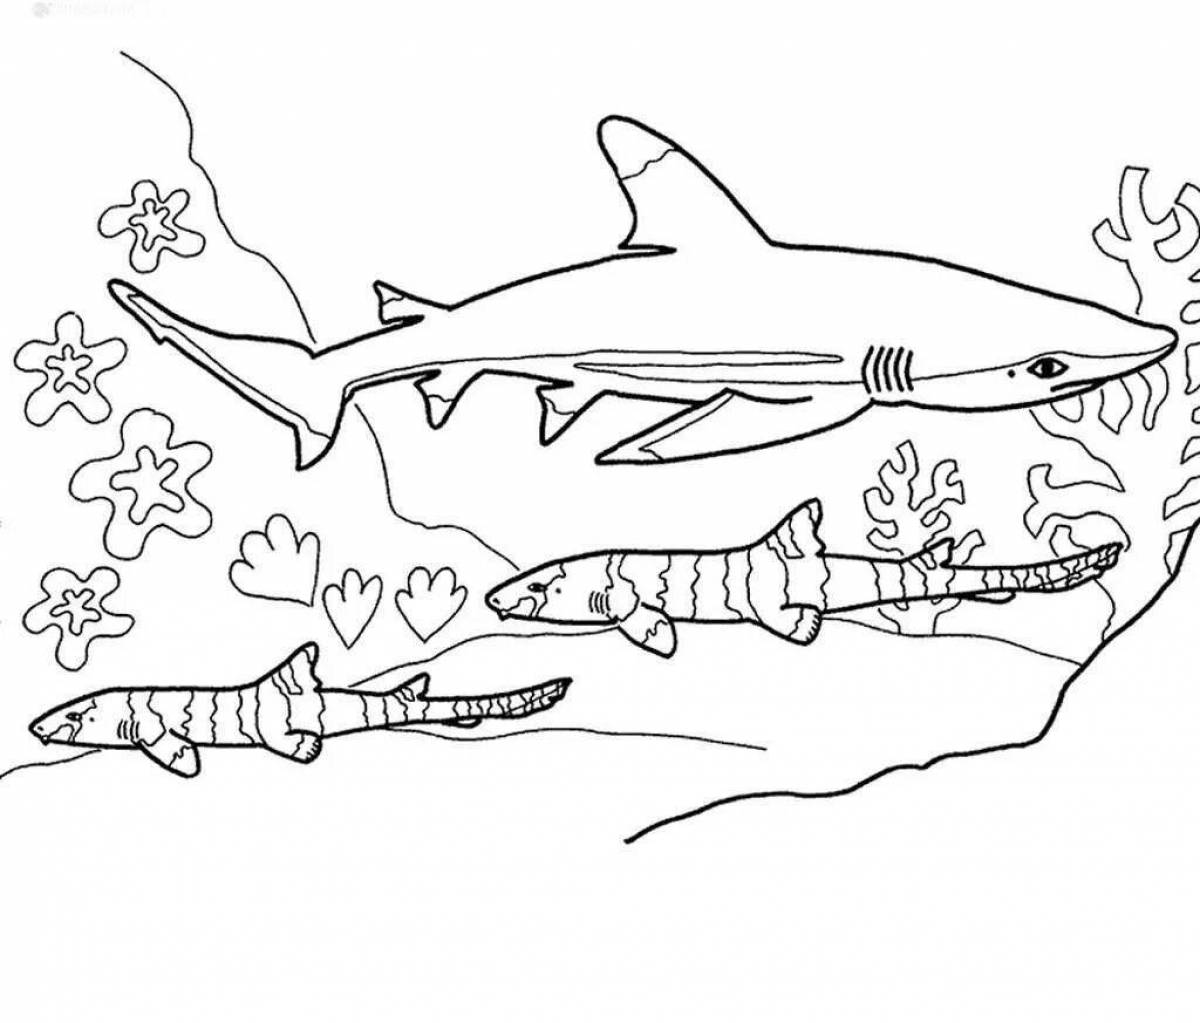 Shark coloring book for kids 6-7 years old